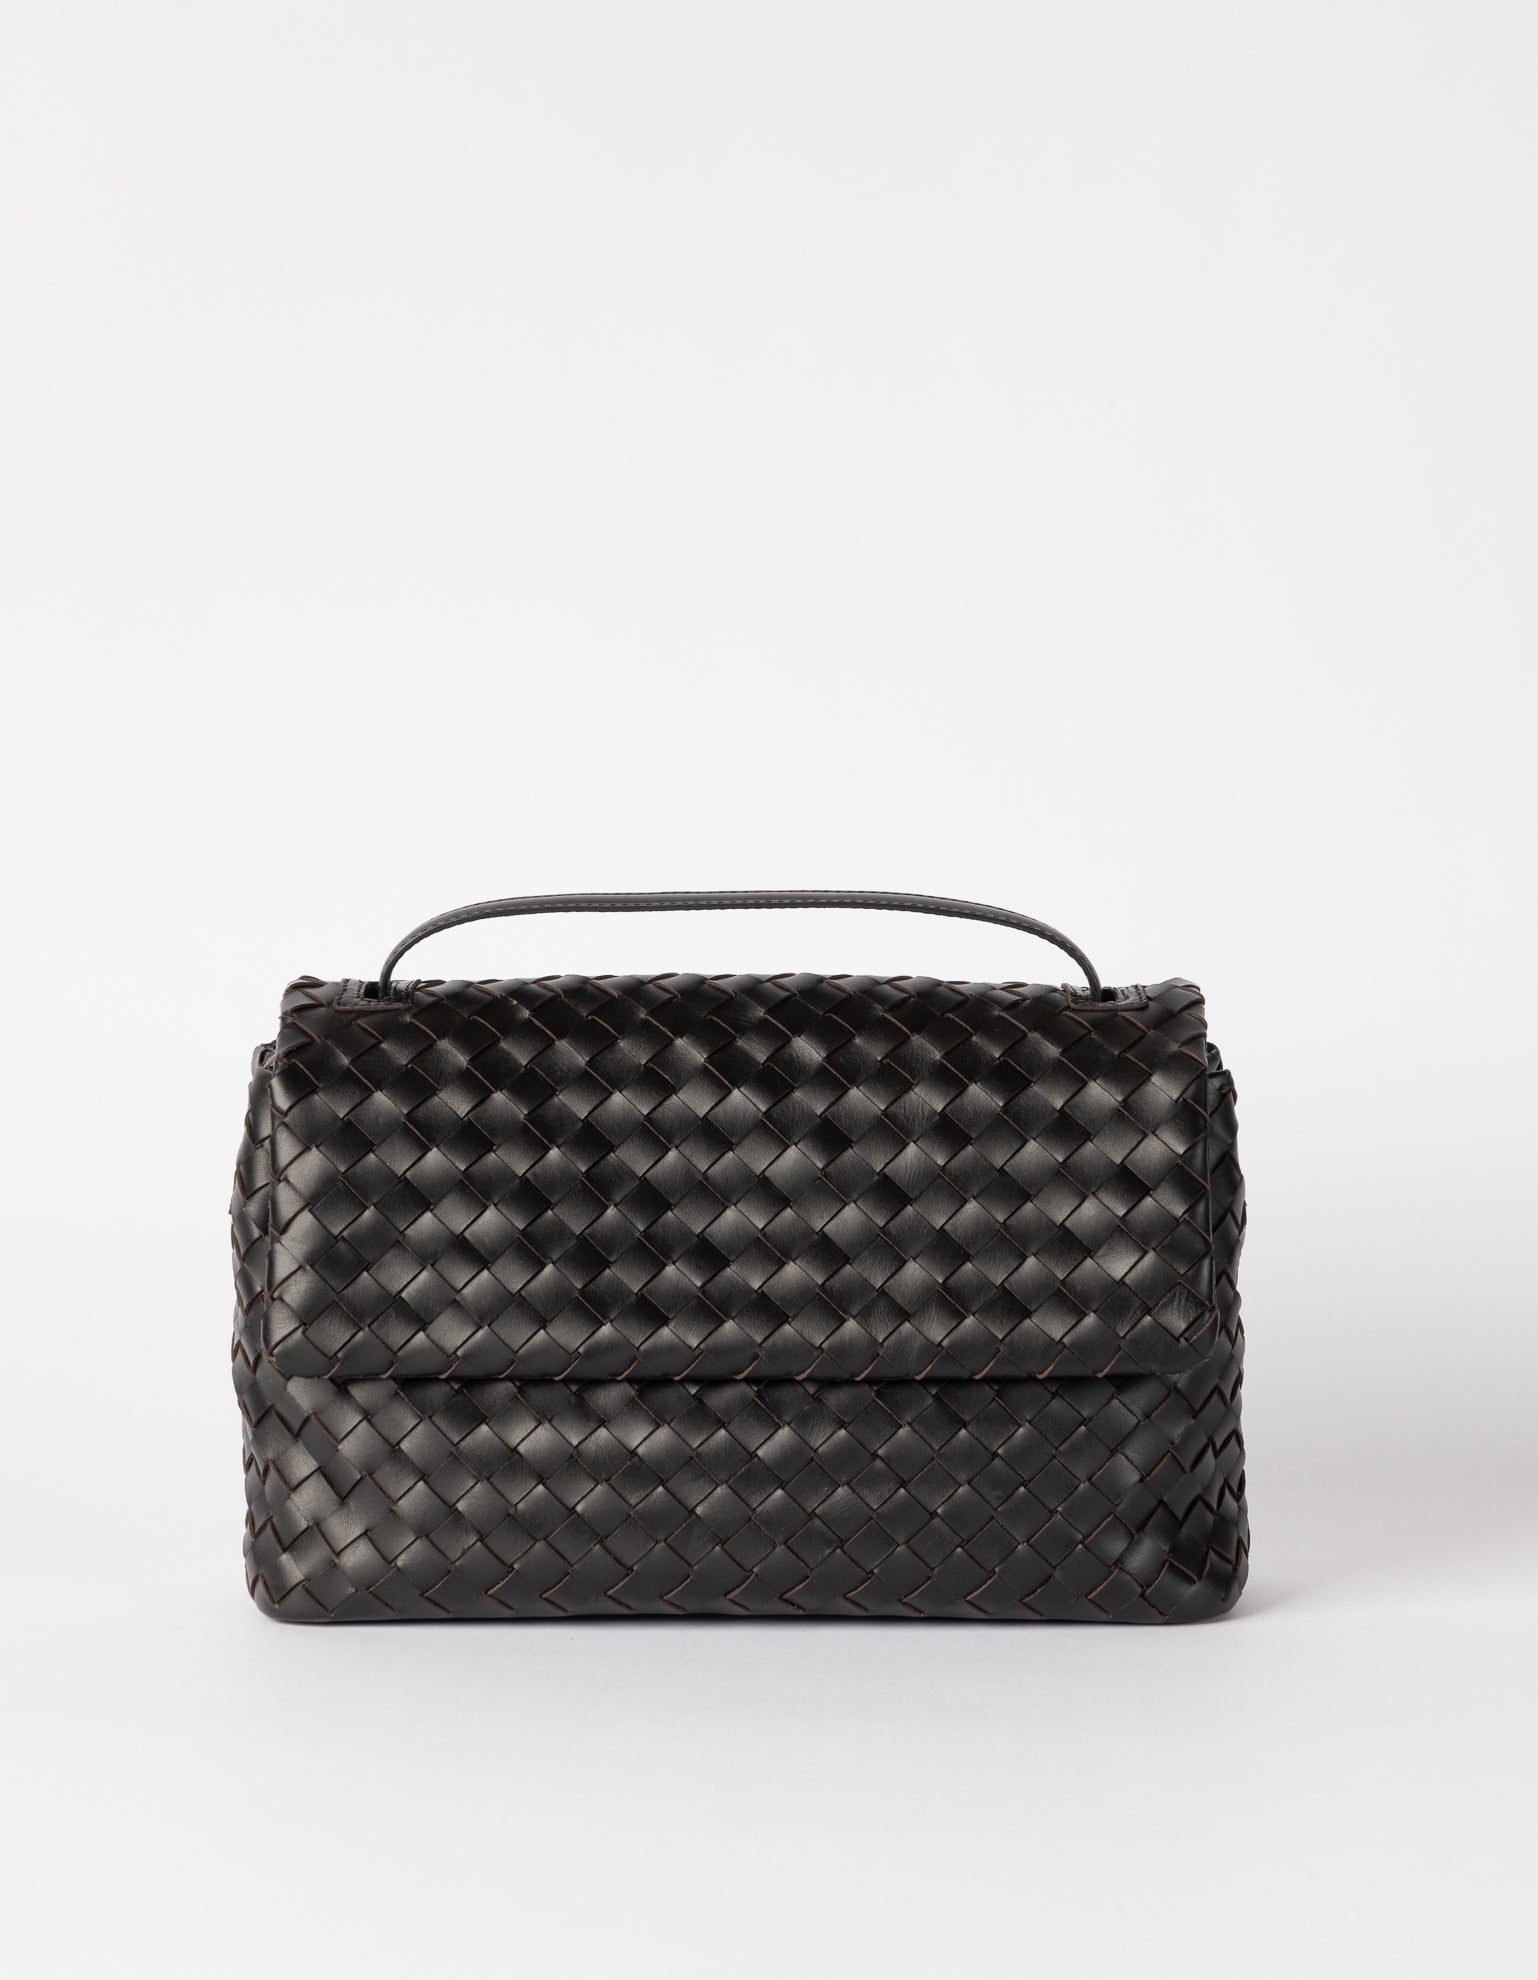 Kenzie - Black Woven Classic Leather